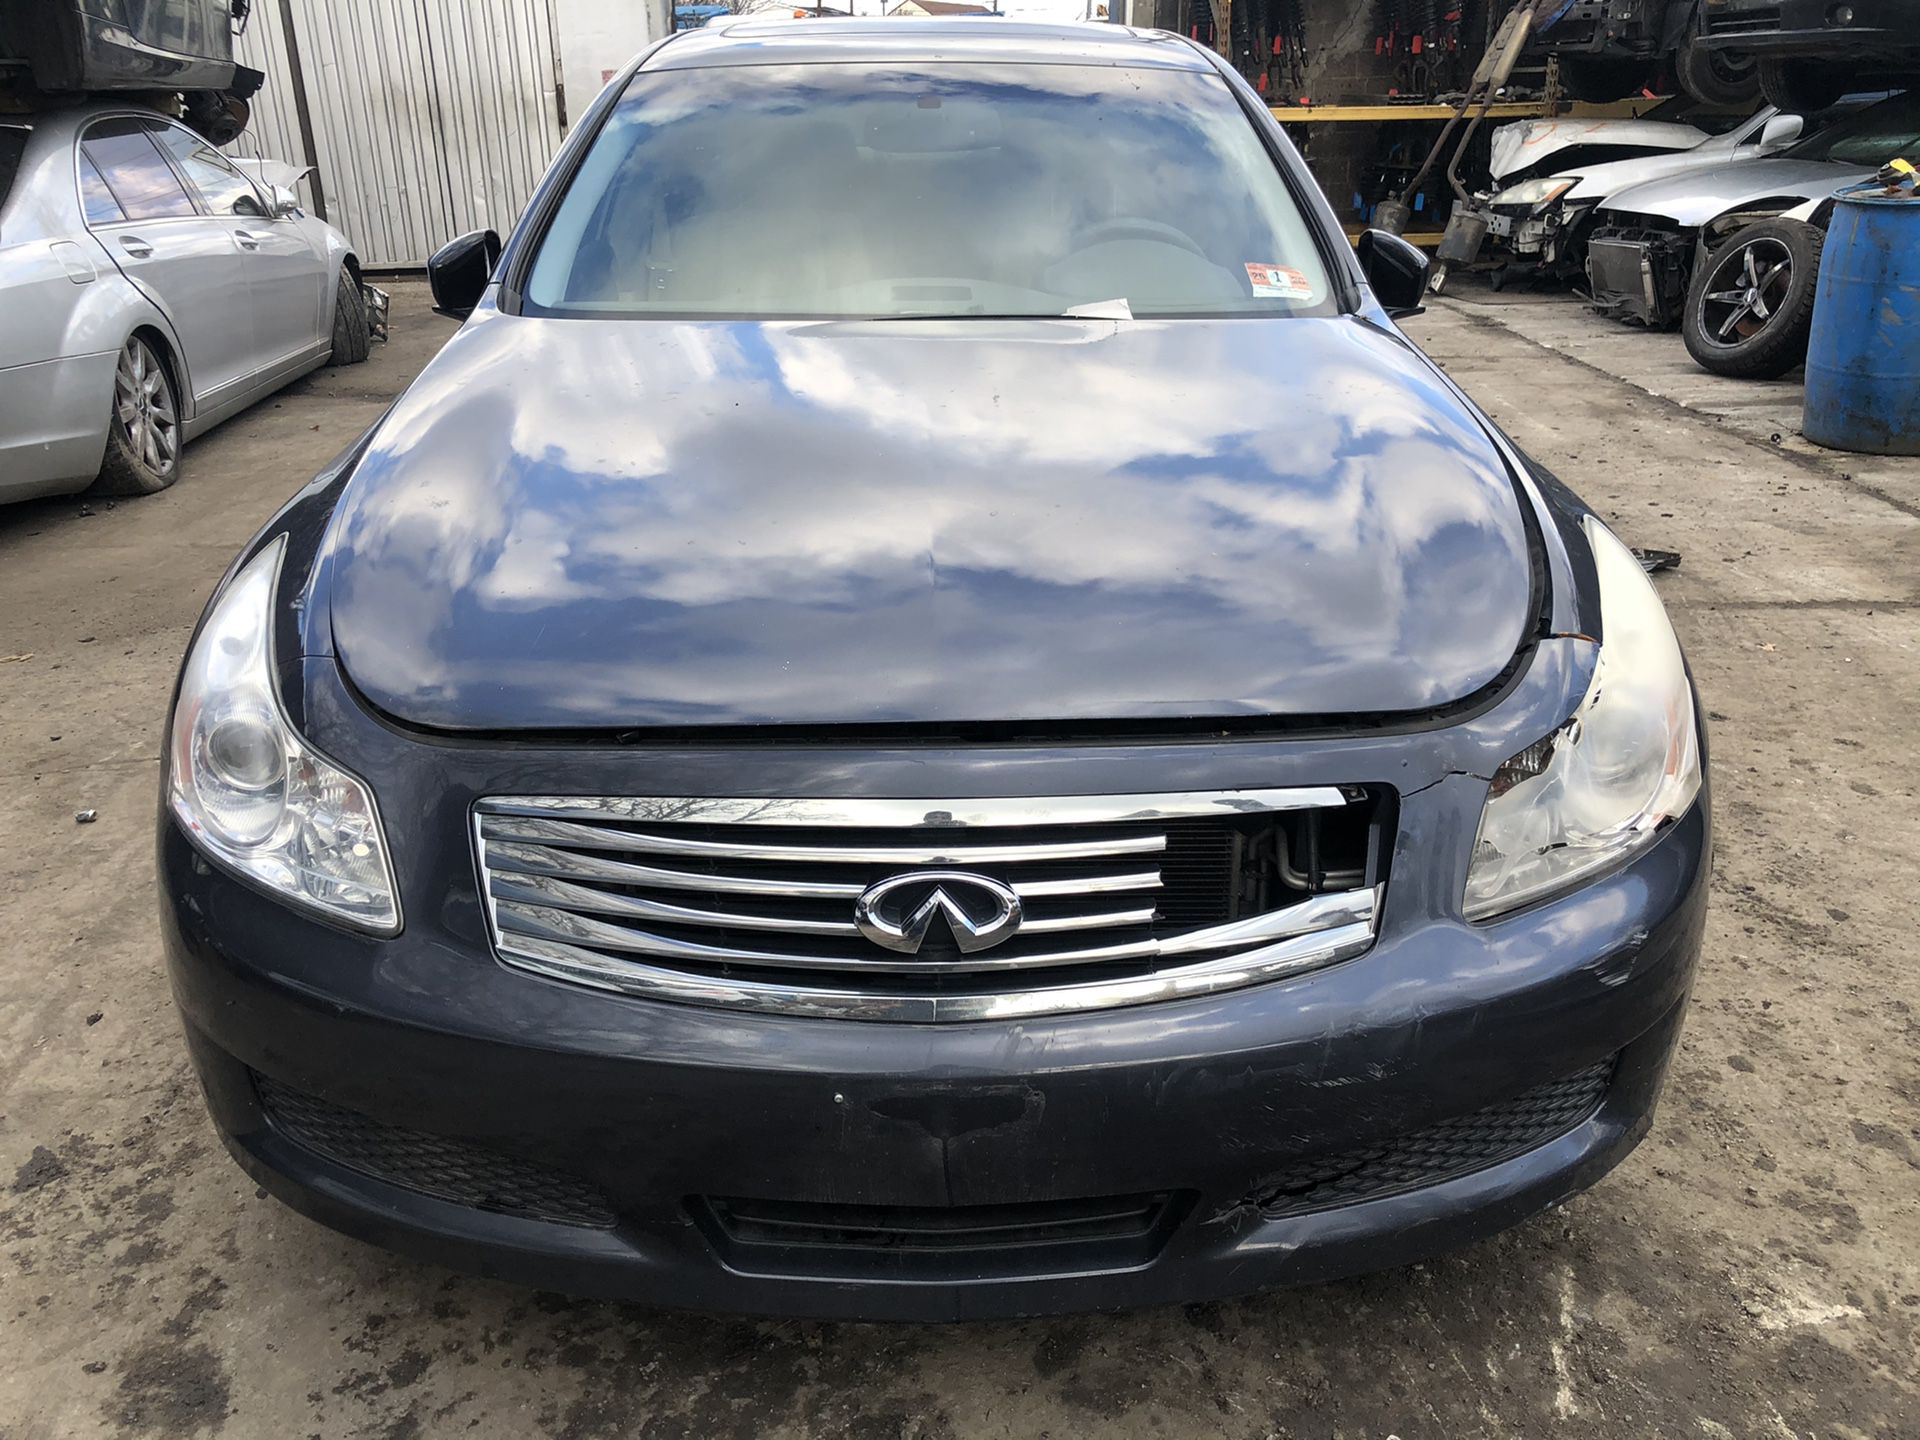 Infinity G37x 2009 parting out only